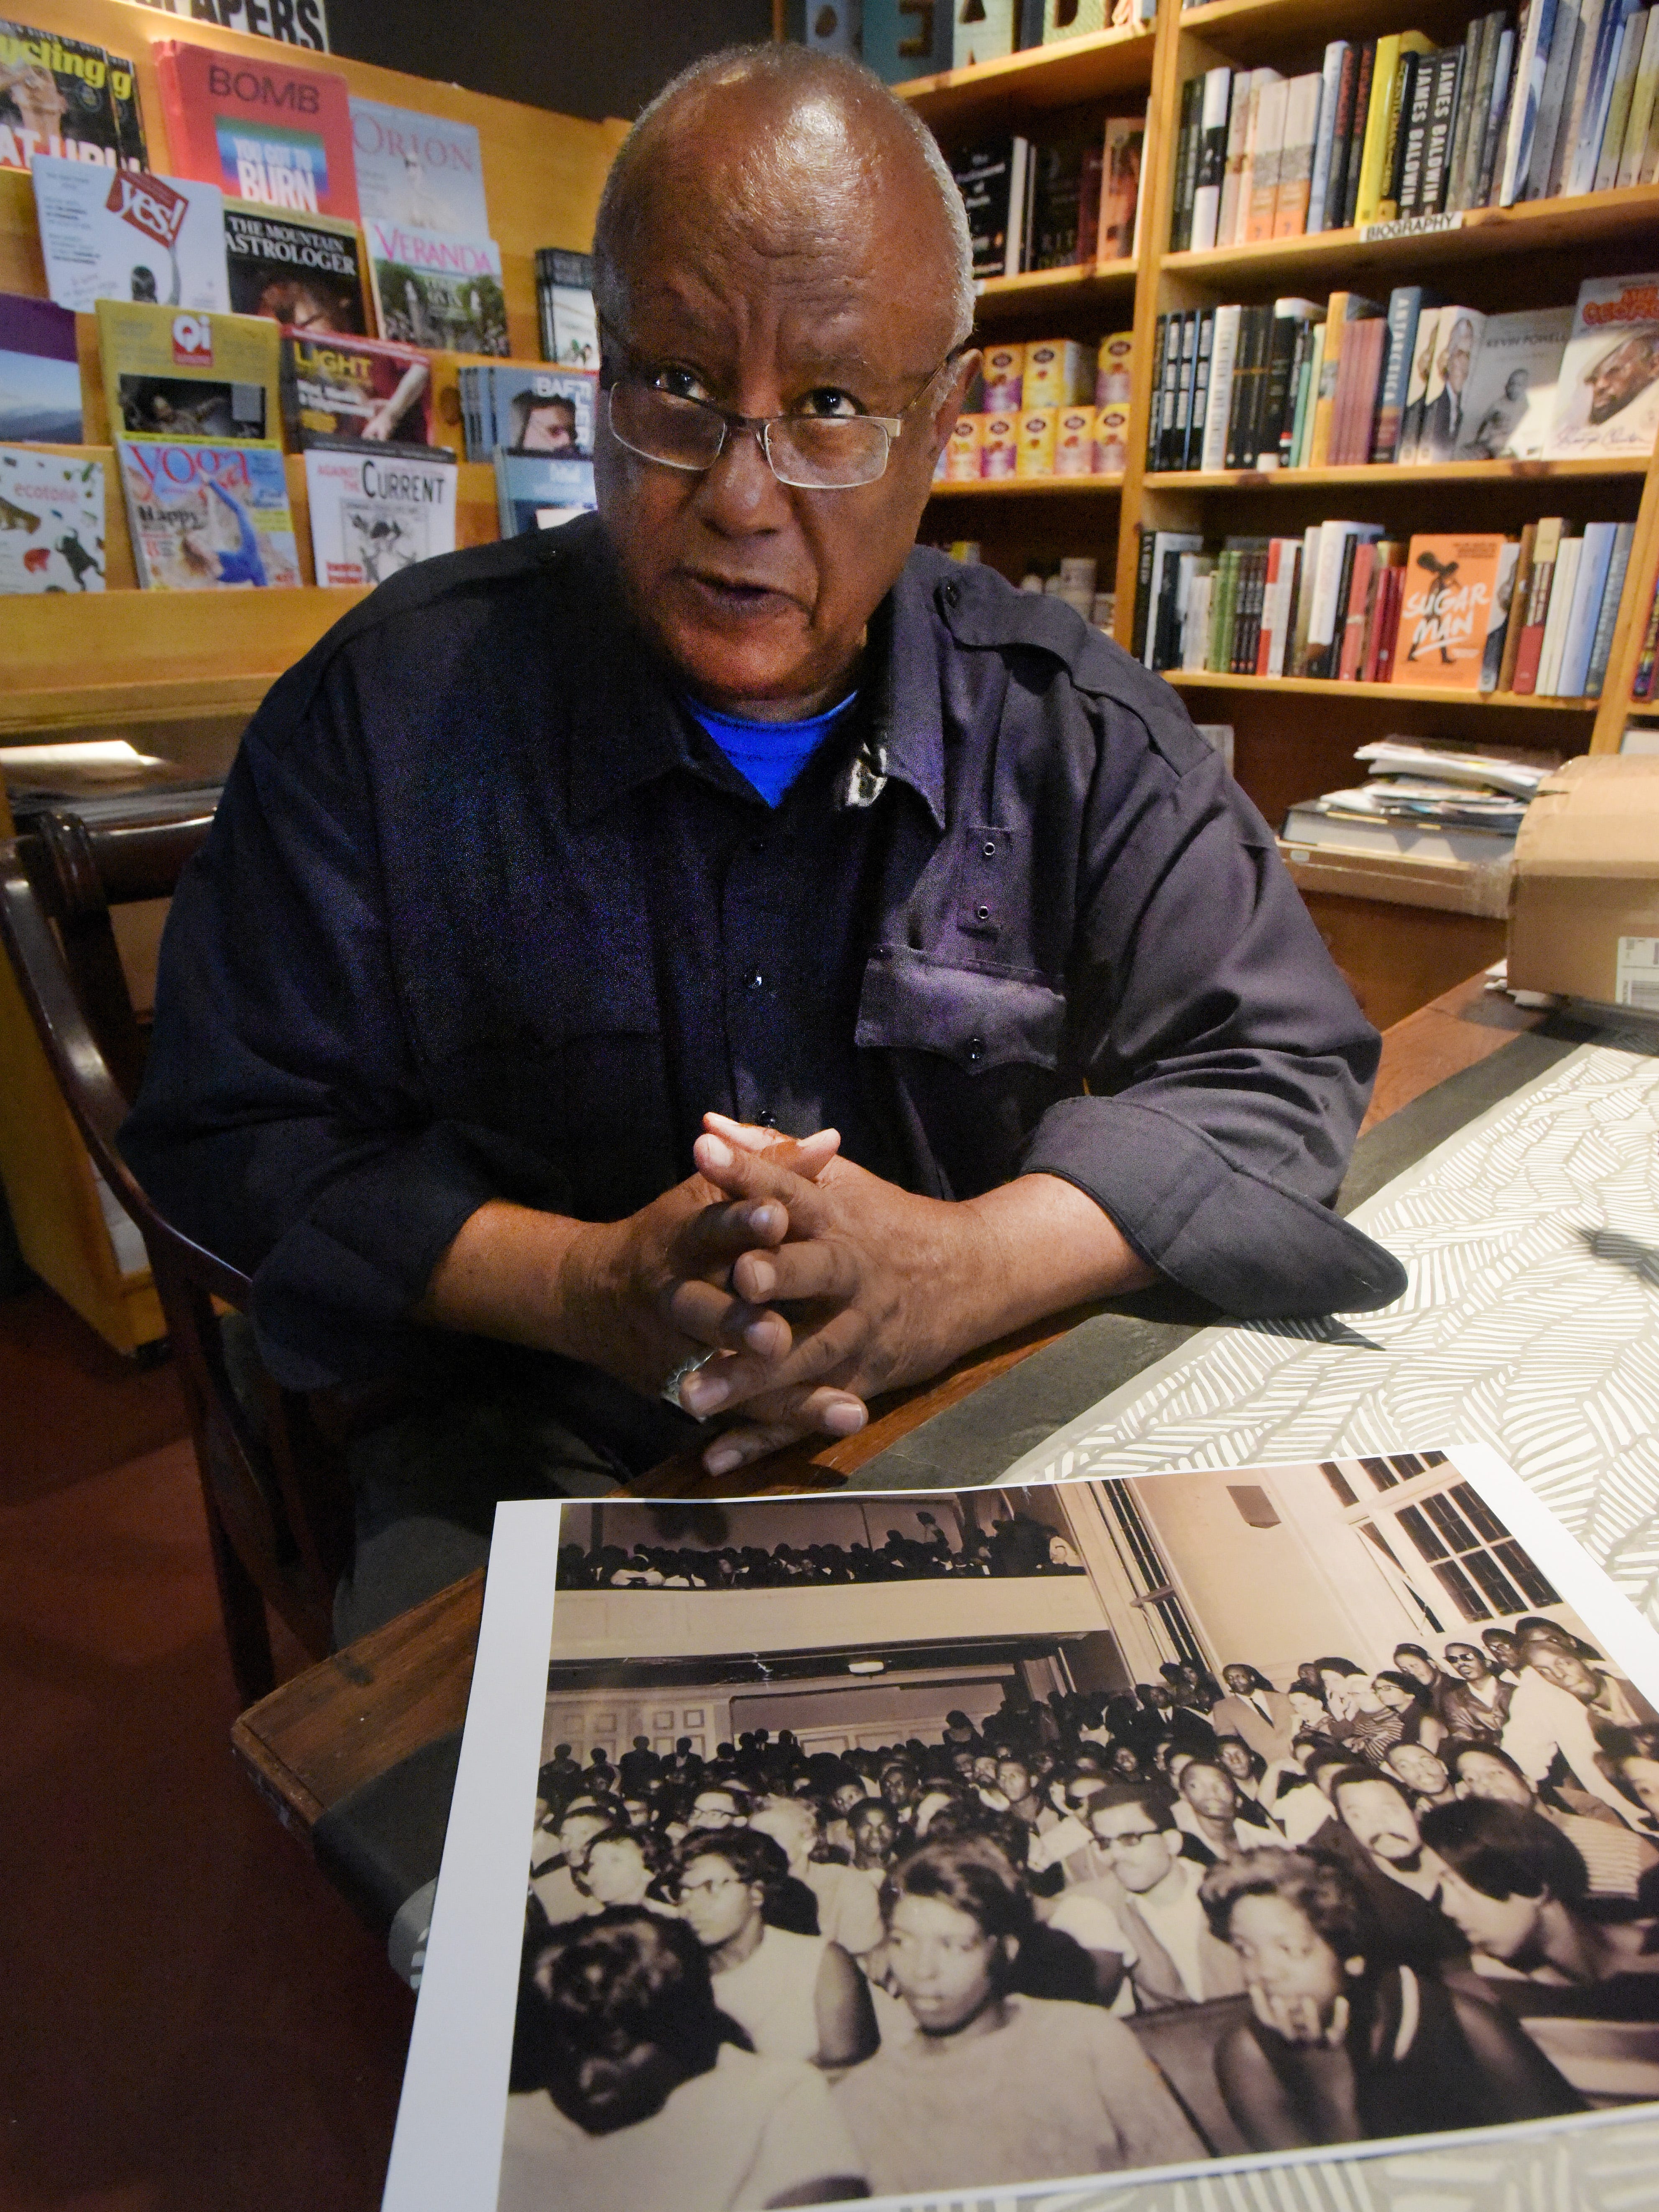 Rev. Dan Aldridge, 75, shows a photo from the tribunal he  organized after the slayings, an attempt to duplicate a real courtroom trial and get to the facts.  A jury of white and black citizens, including Rosa Parks, found the defendants guilty on all counts.